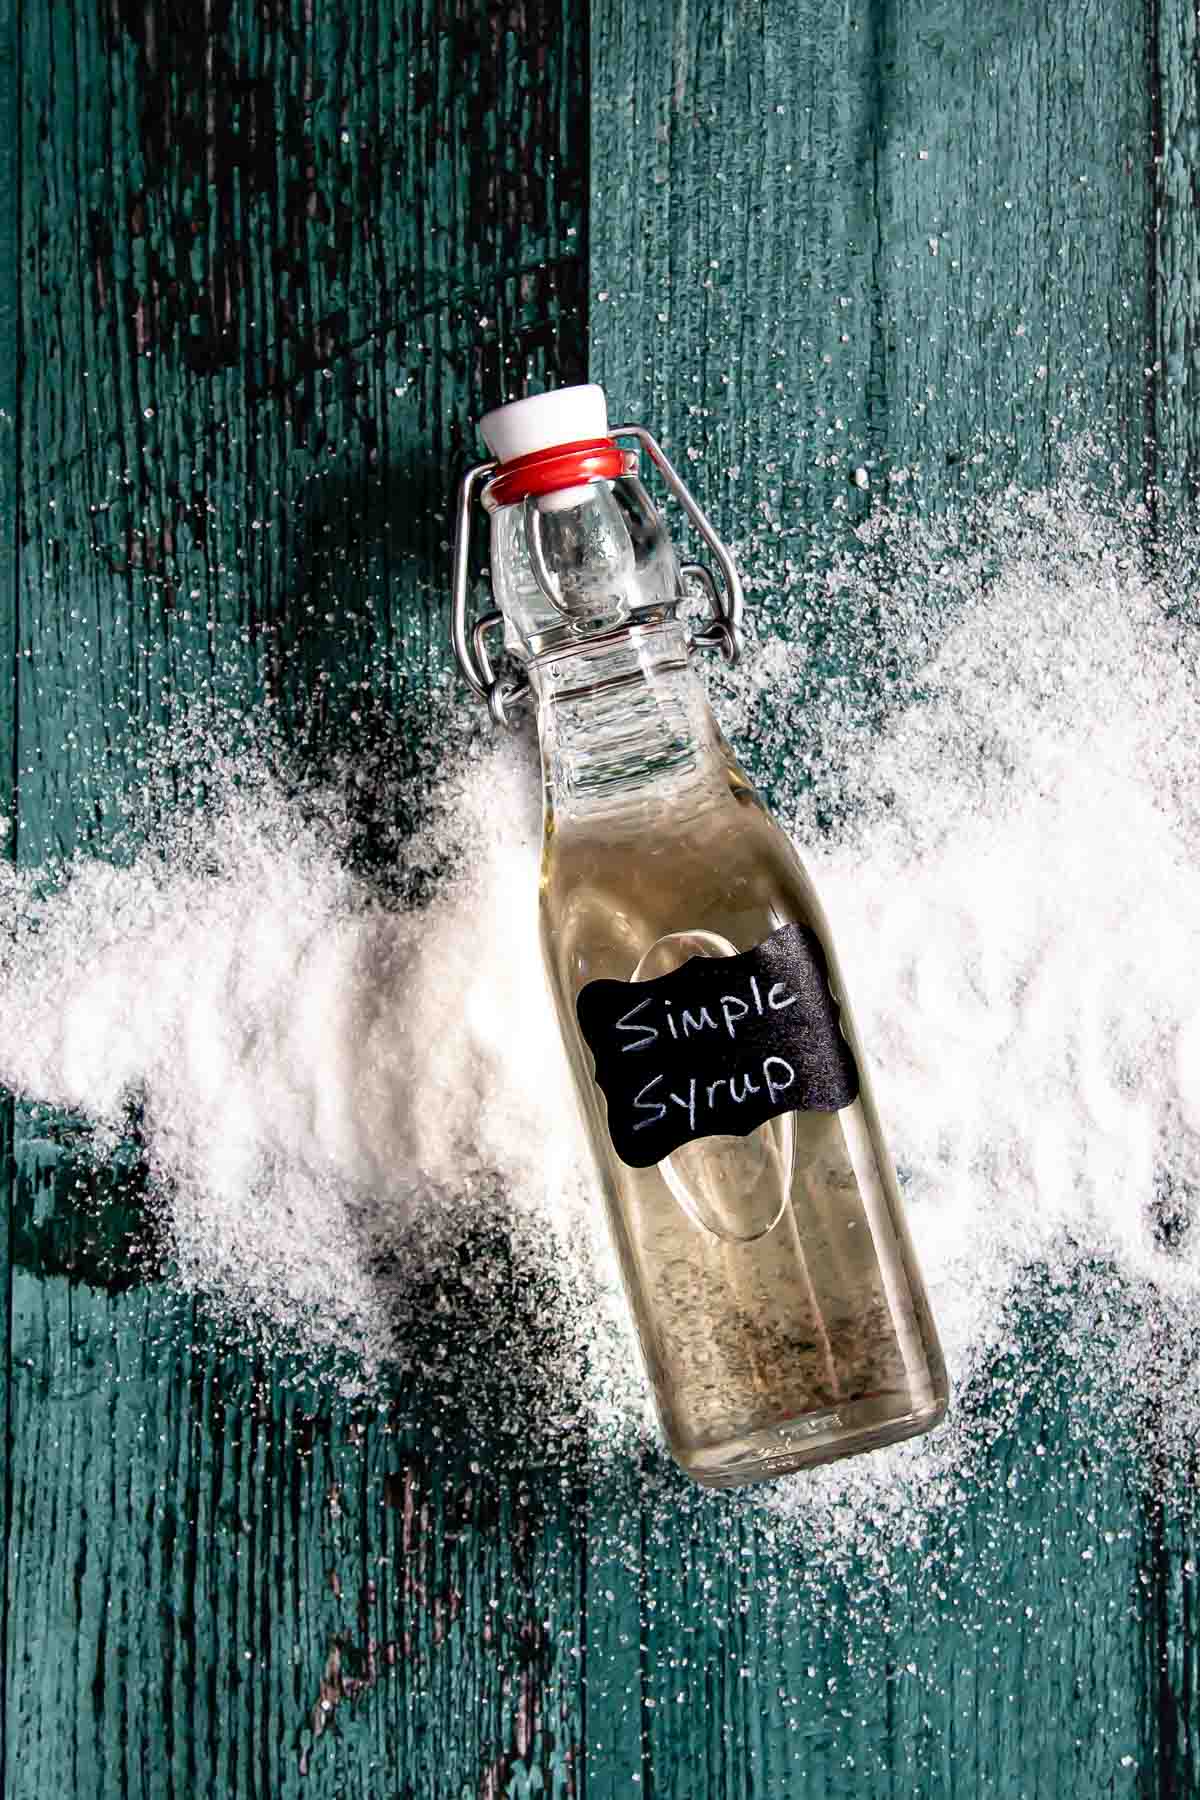 A bottle of homemade simple syrup